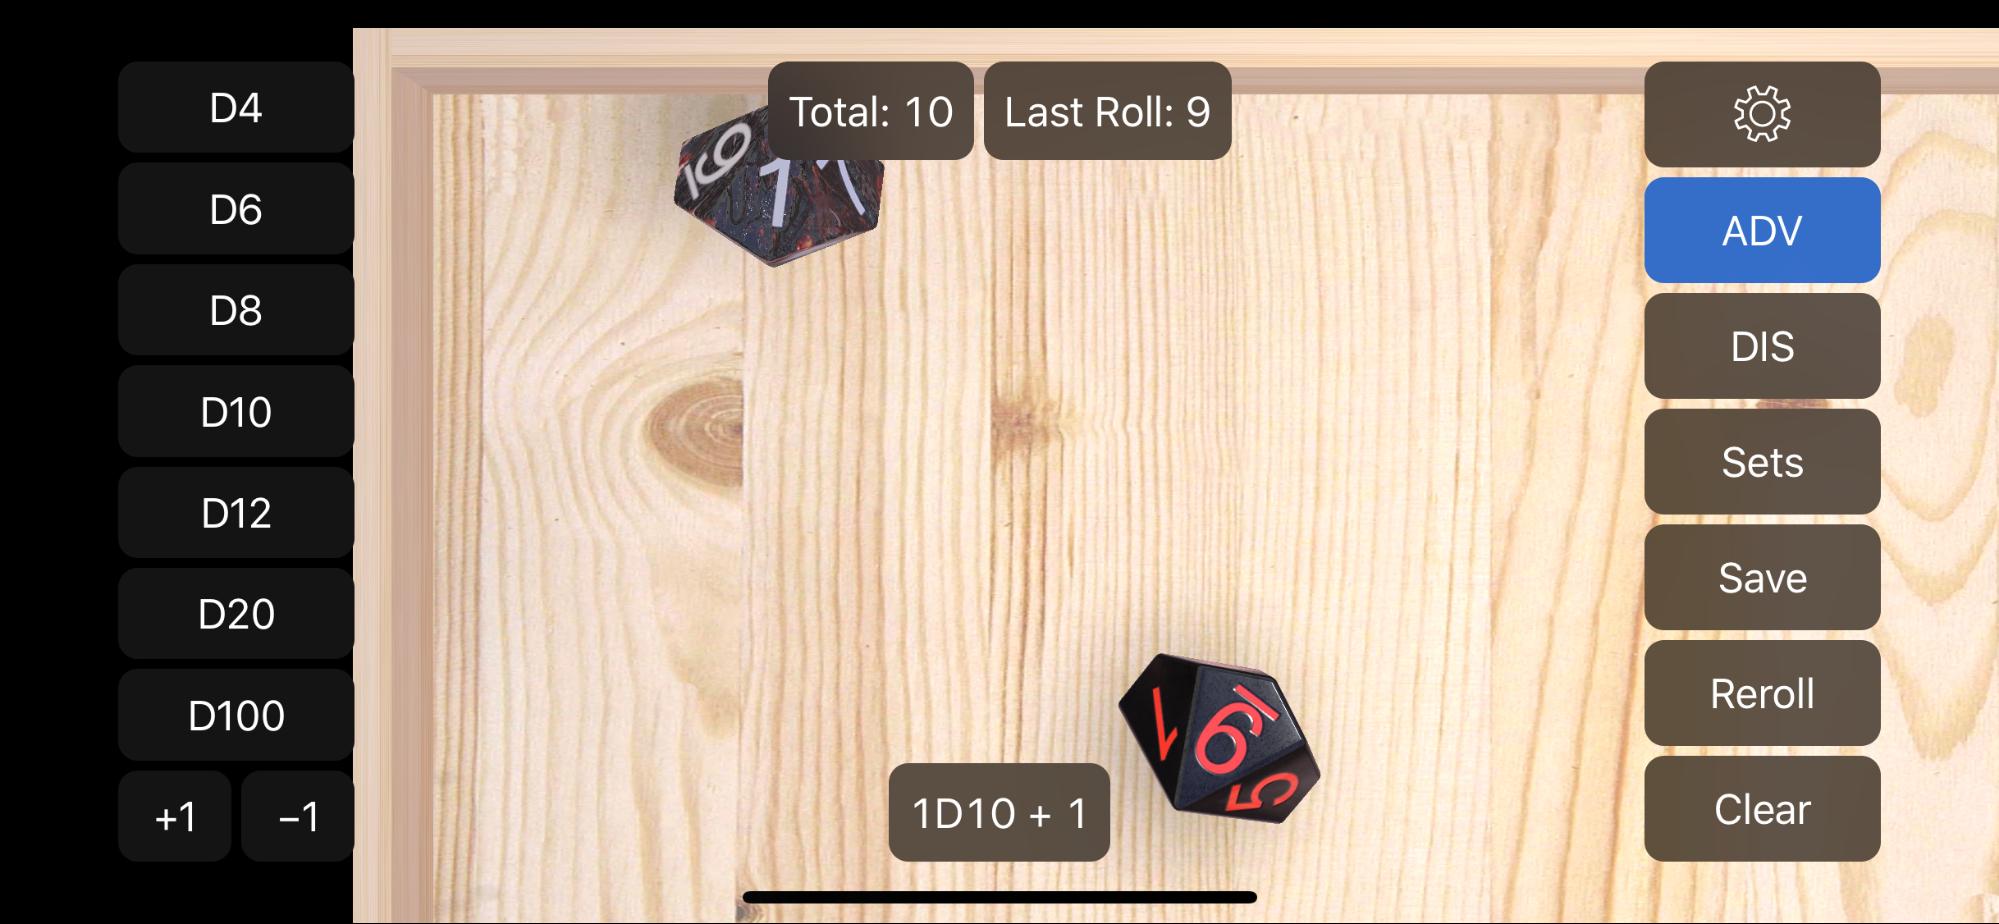 Using modifiers in Dice